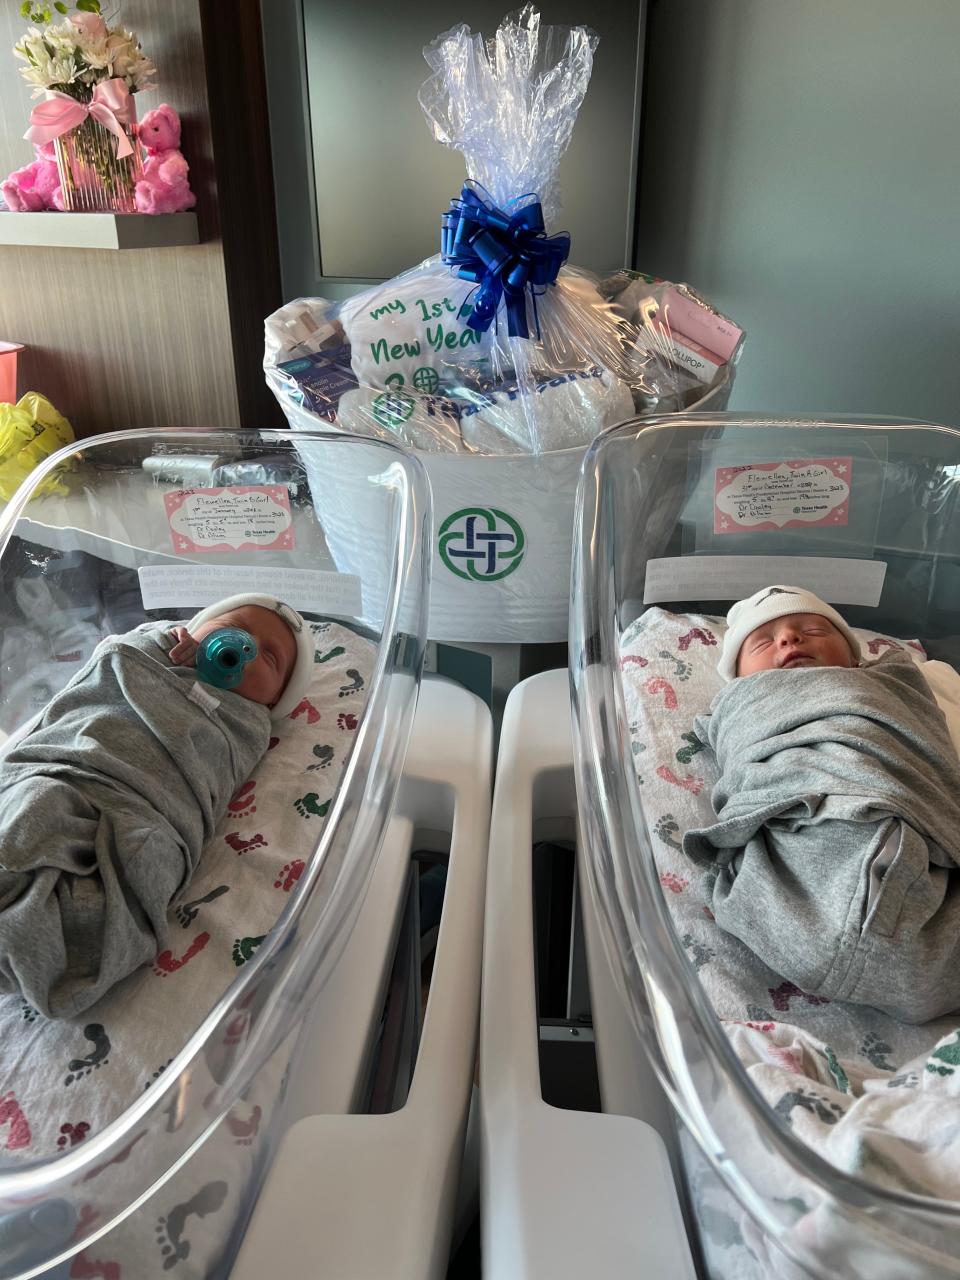 Effie Rose Scott, at left, who was born at 12:01 a.m. Jan. 1, 2023 at Texas Health Presbyterian Hospital Denton, and her twin sister, Annie Jo, who was born at 11:55 p.m. ET on Dec. 31, 2022.